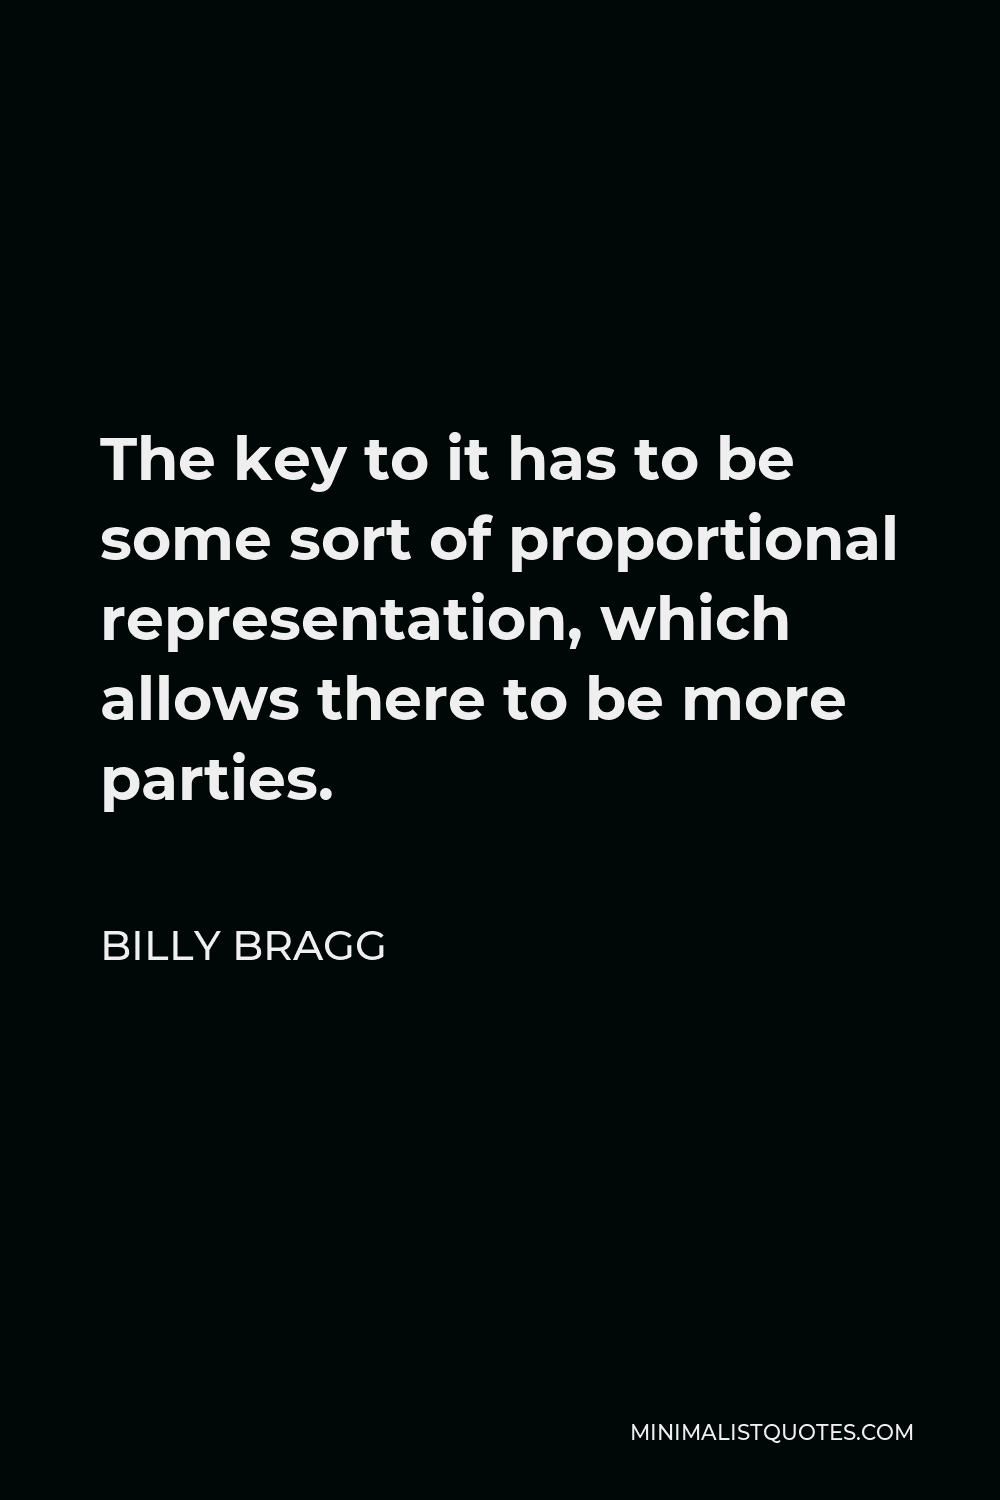 Billy Bragg Quote - The key to it has to be some sort of proportional representation, which allows there to be more parties.